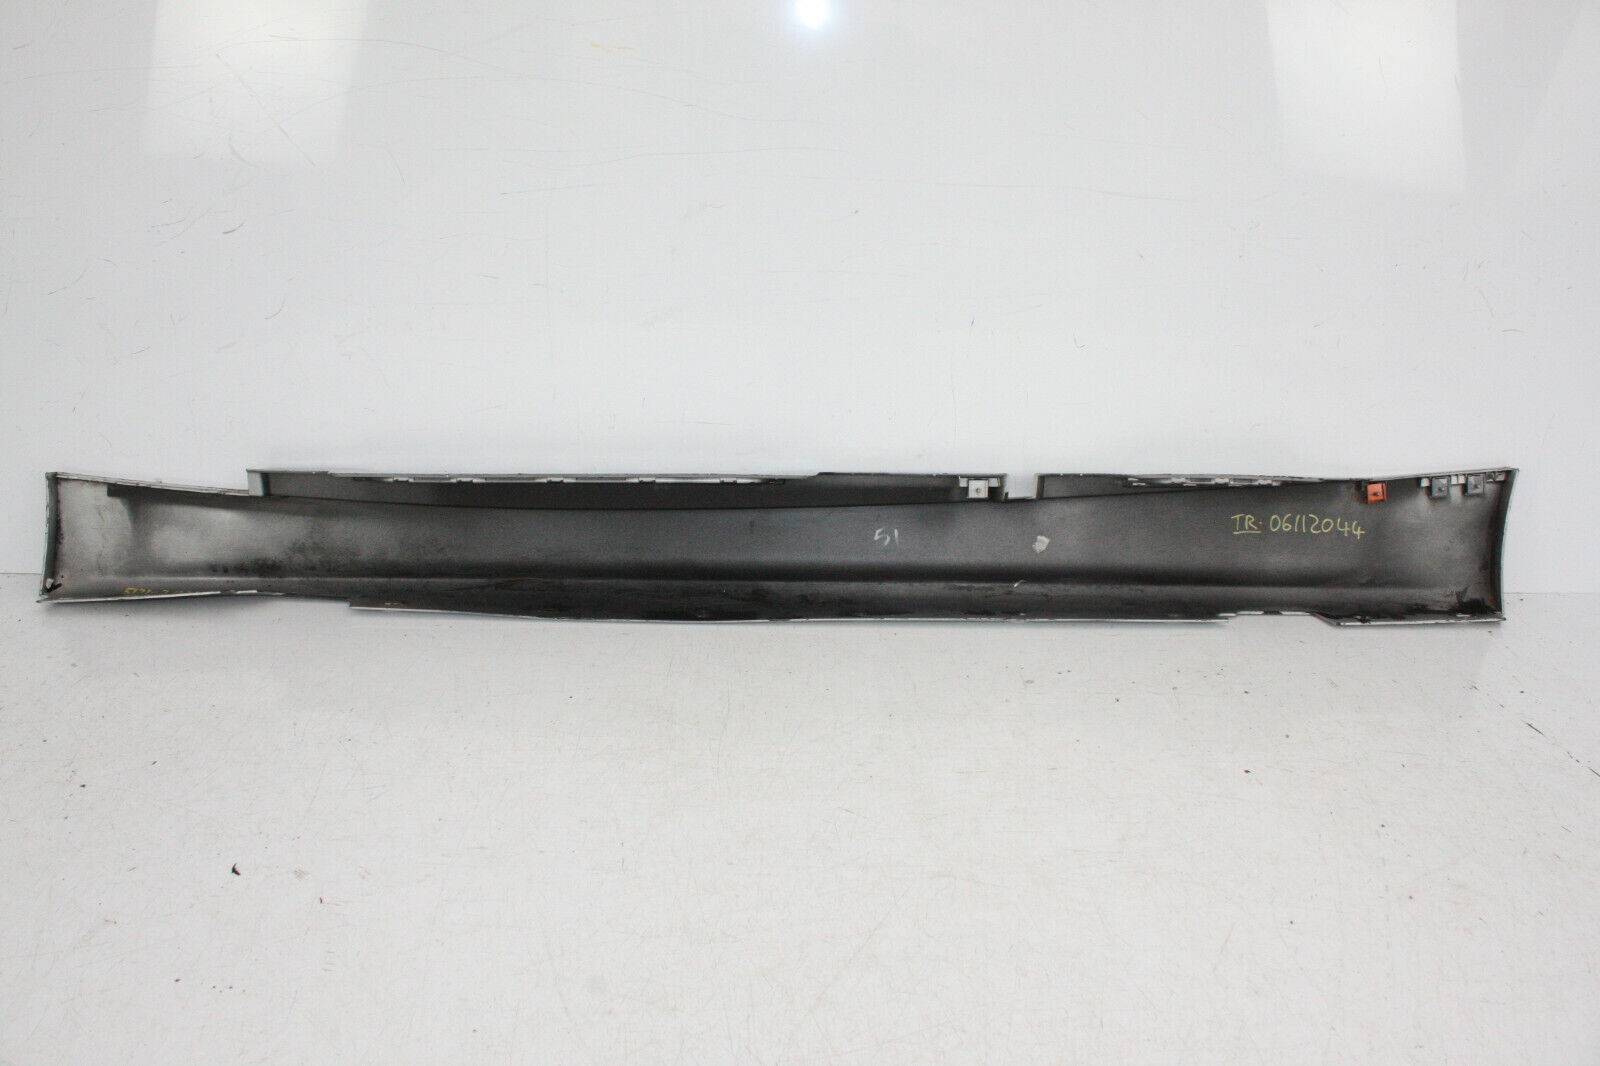 BMW-1-SERIES-E87-RIGHT-SIDE-SKIRT-2004-TO-2007-175367544522-5